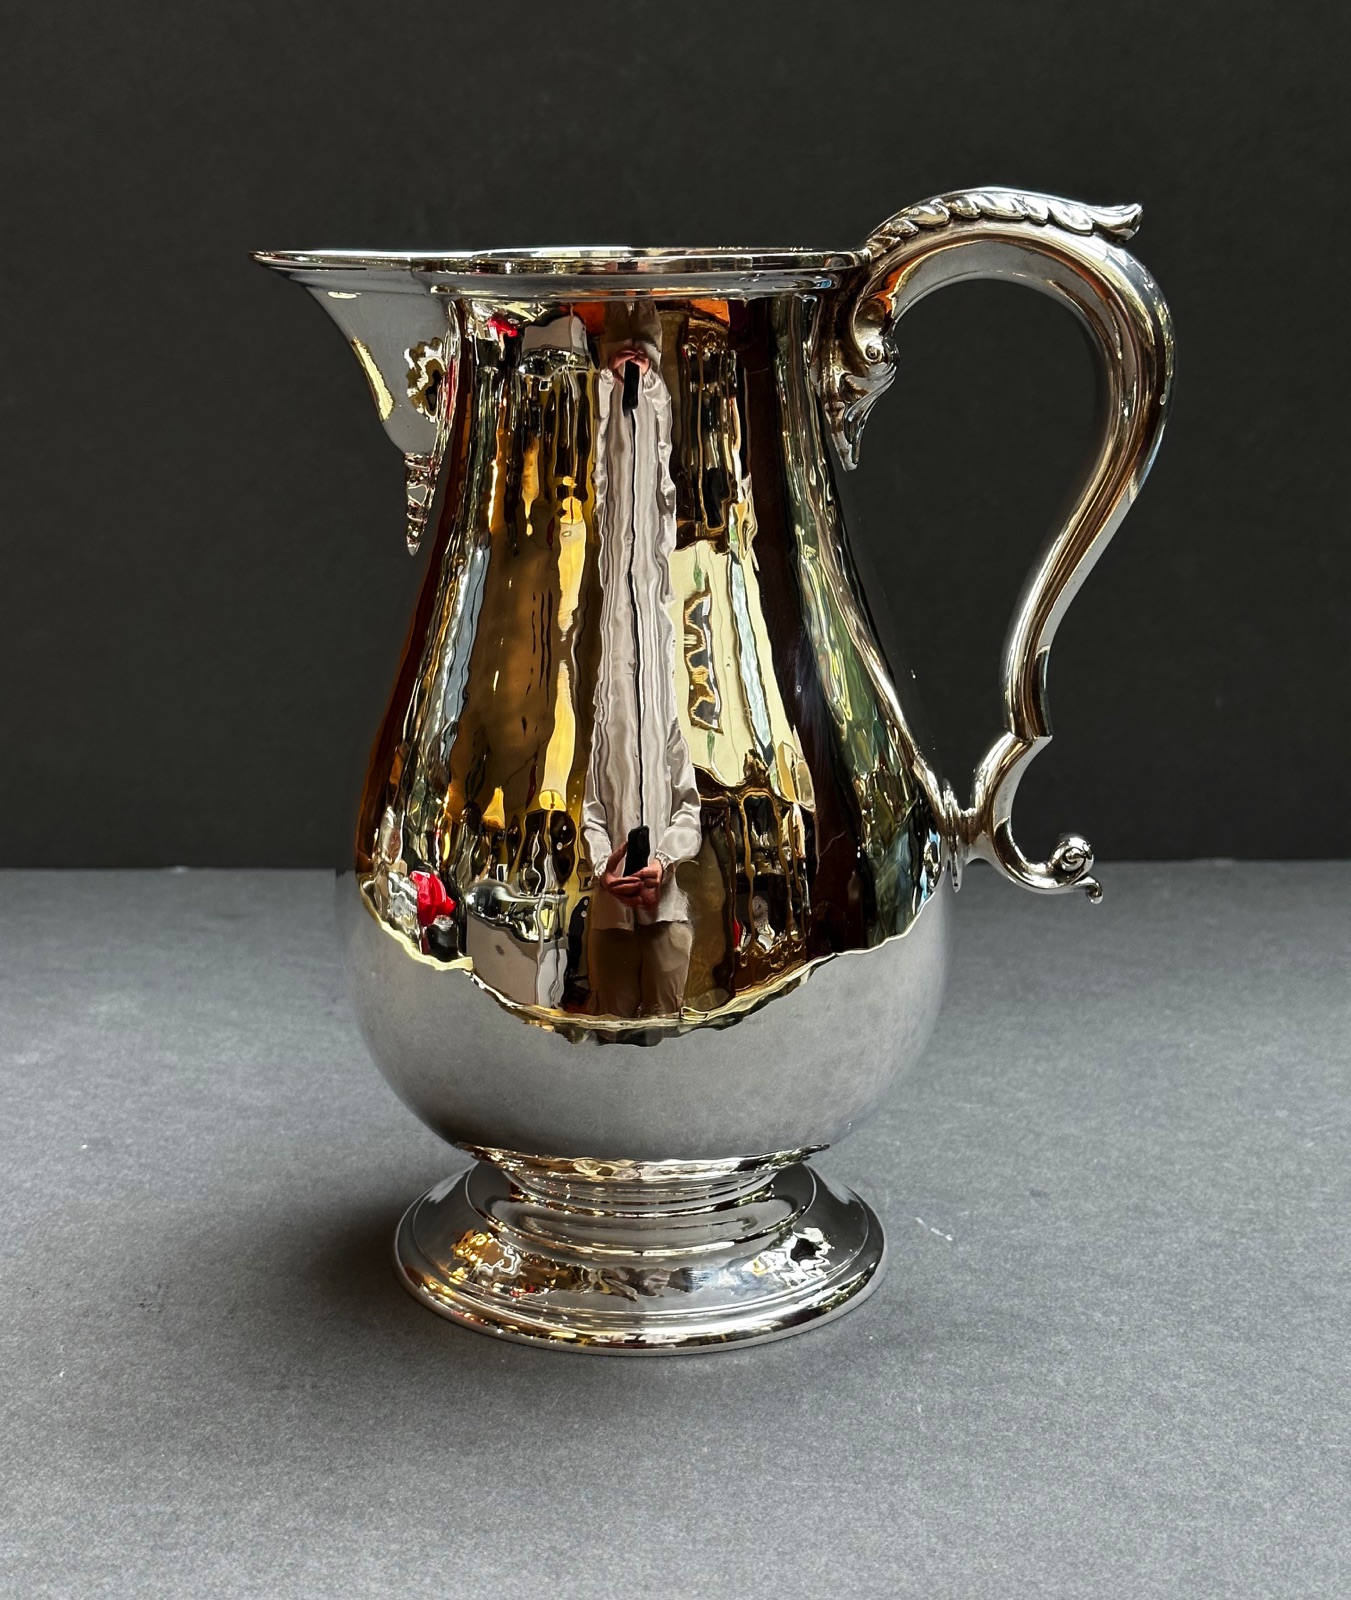 Antique Ornate Brass and Silver Pitcher Metal Jug -  Canada